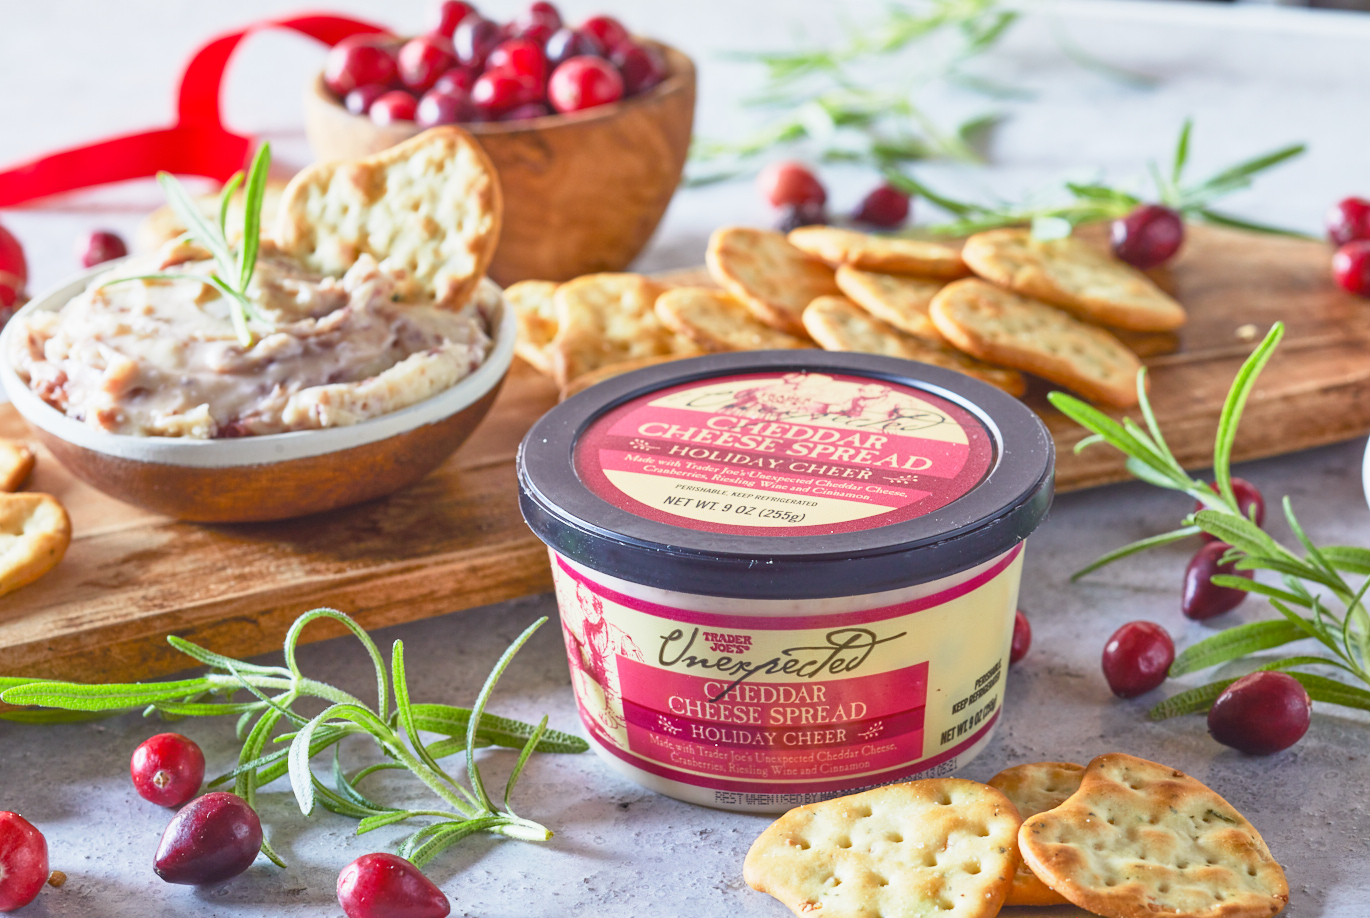 Holiday Cheer Unexpected Cheddar Cheese Spread